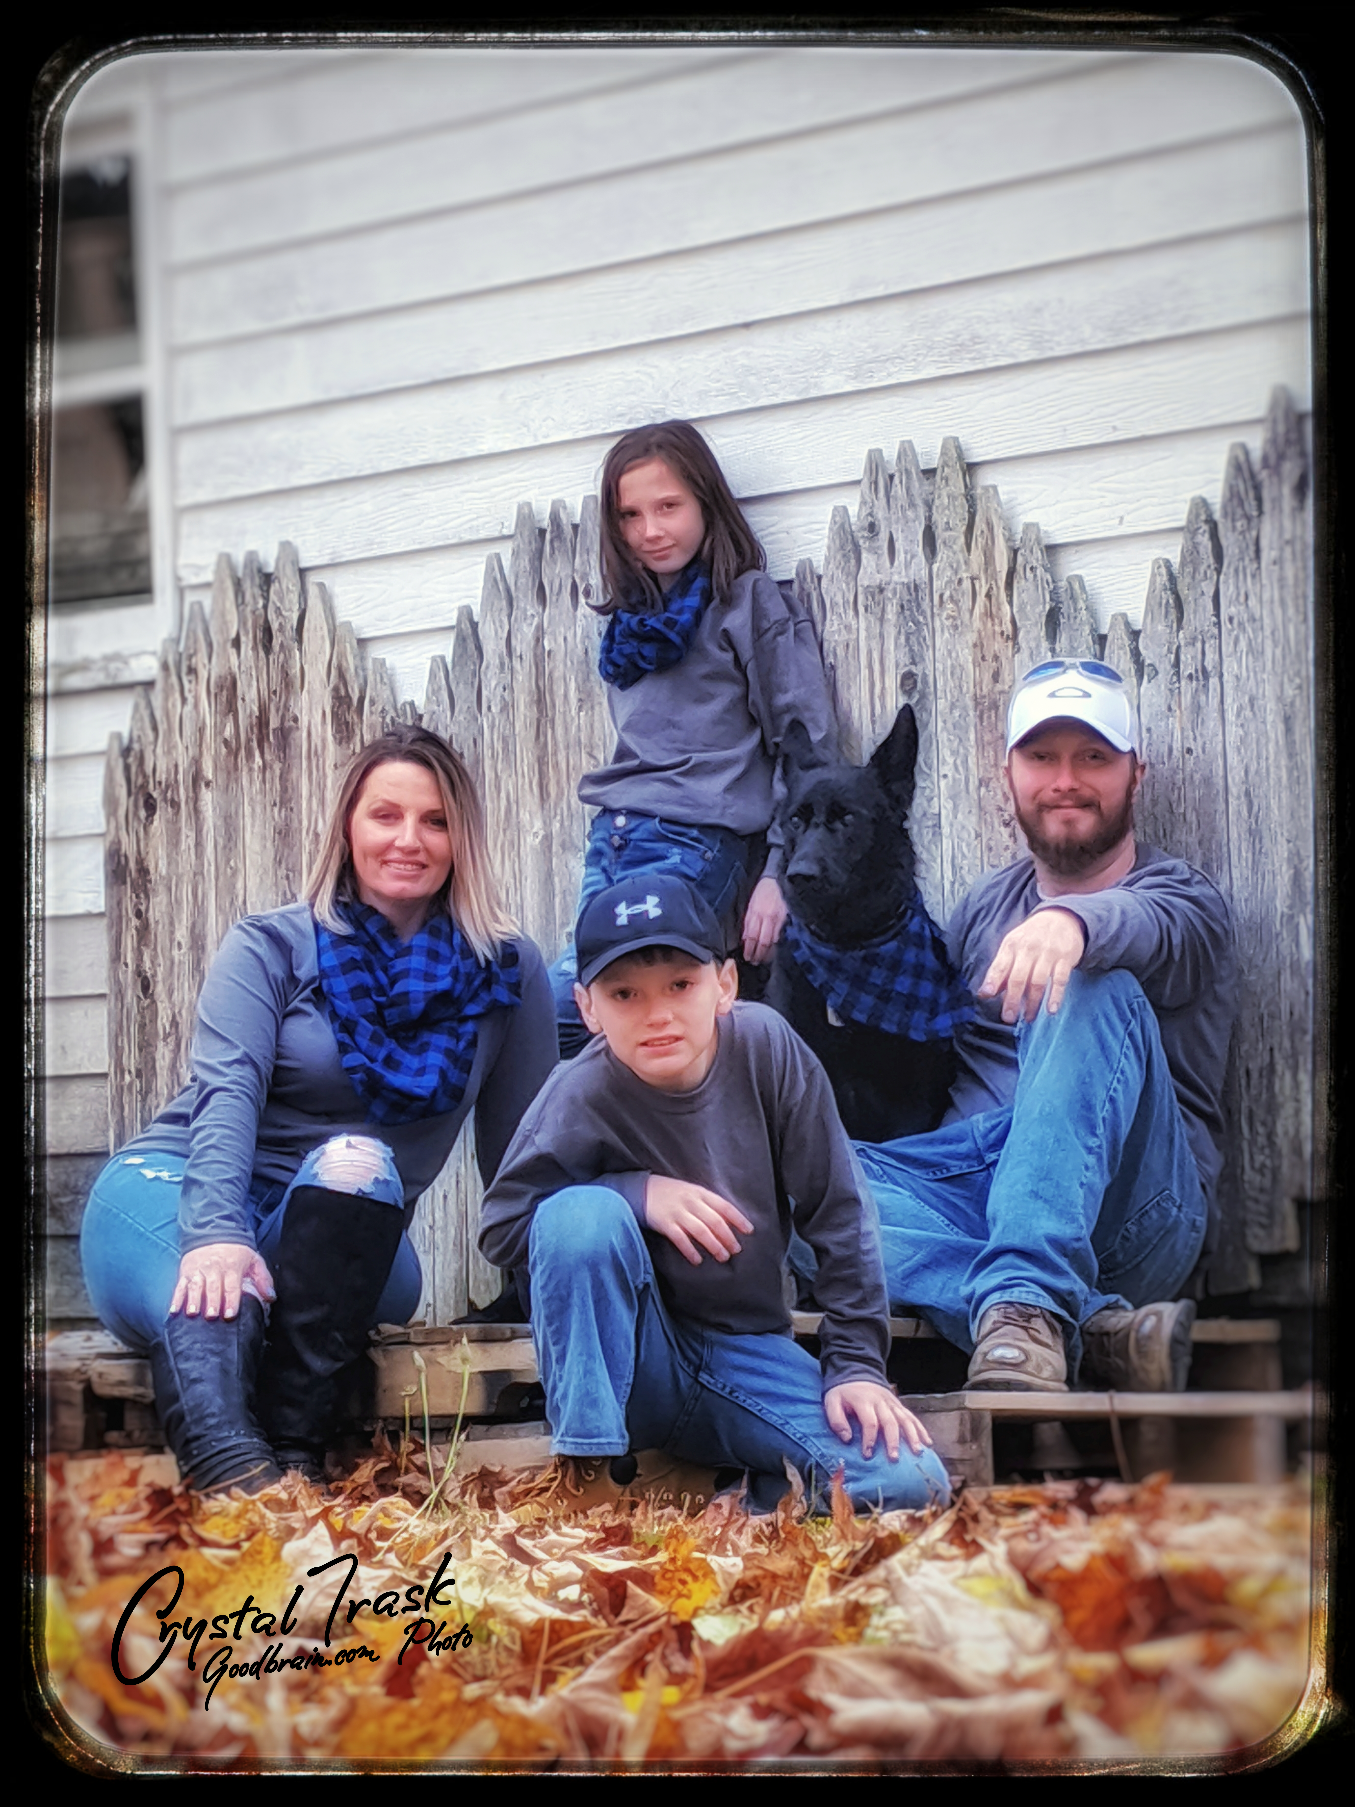 The Sullivan Family in a Gone Flannel Portrait by Crystal Trask of Goodbrain.com Photo